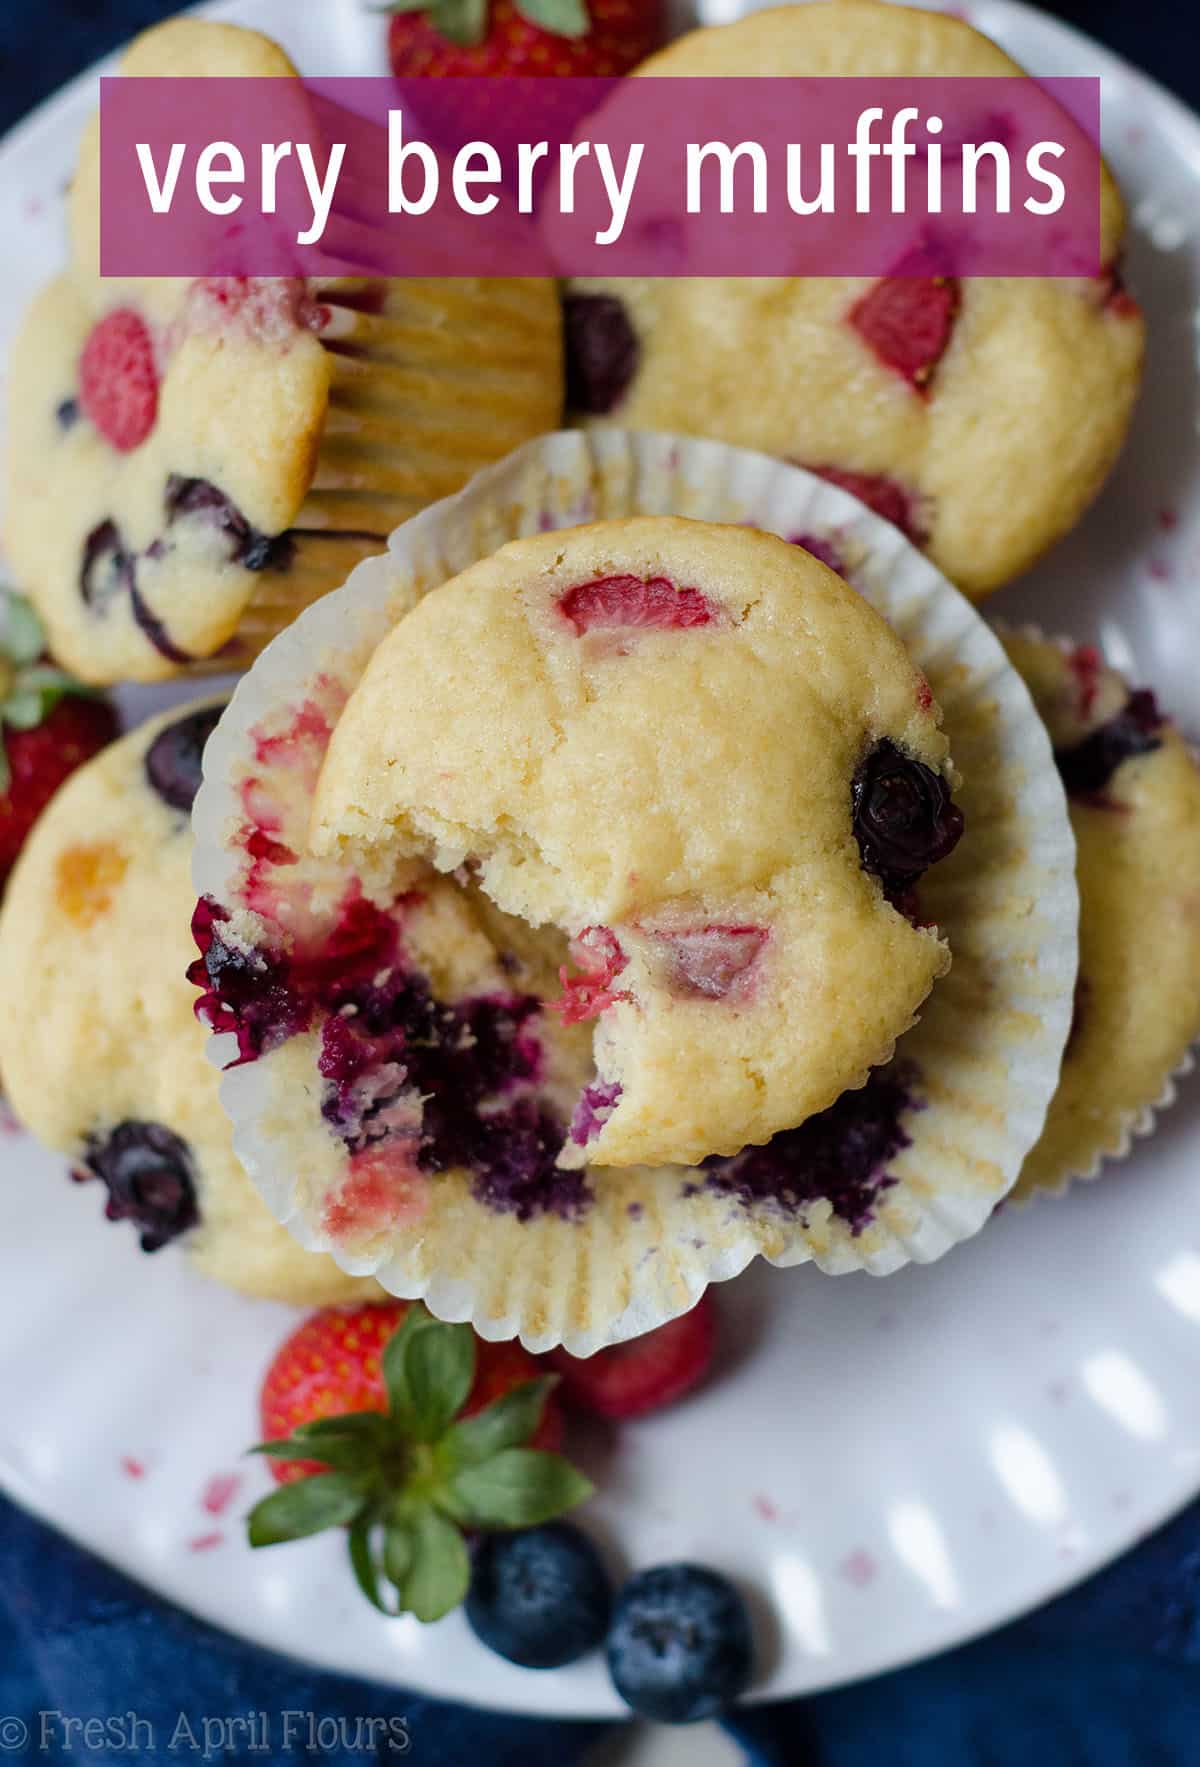 Very Berry Muffins: Soft and flavorful buttermilk muffins bursting with blueberries, raspberries, and strawberries.  via @frshaprilflours